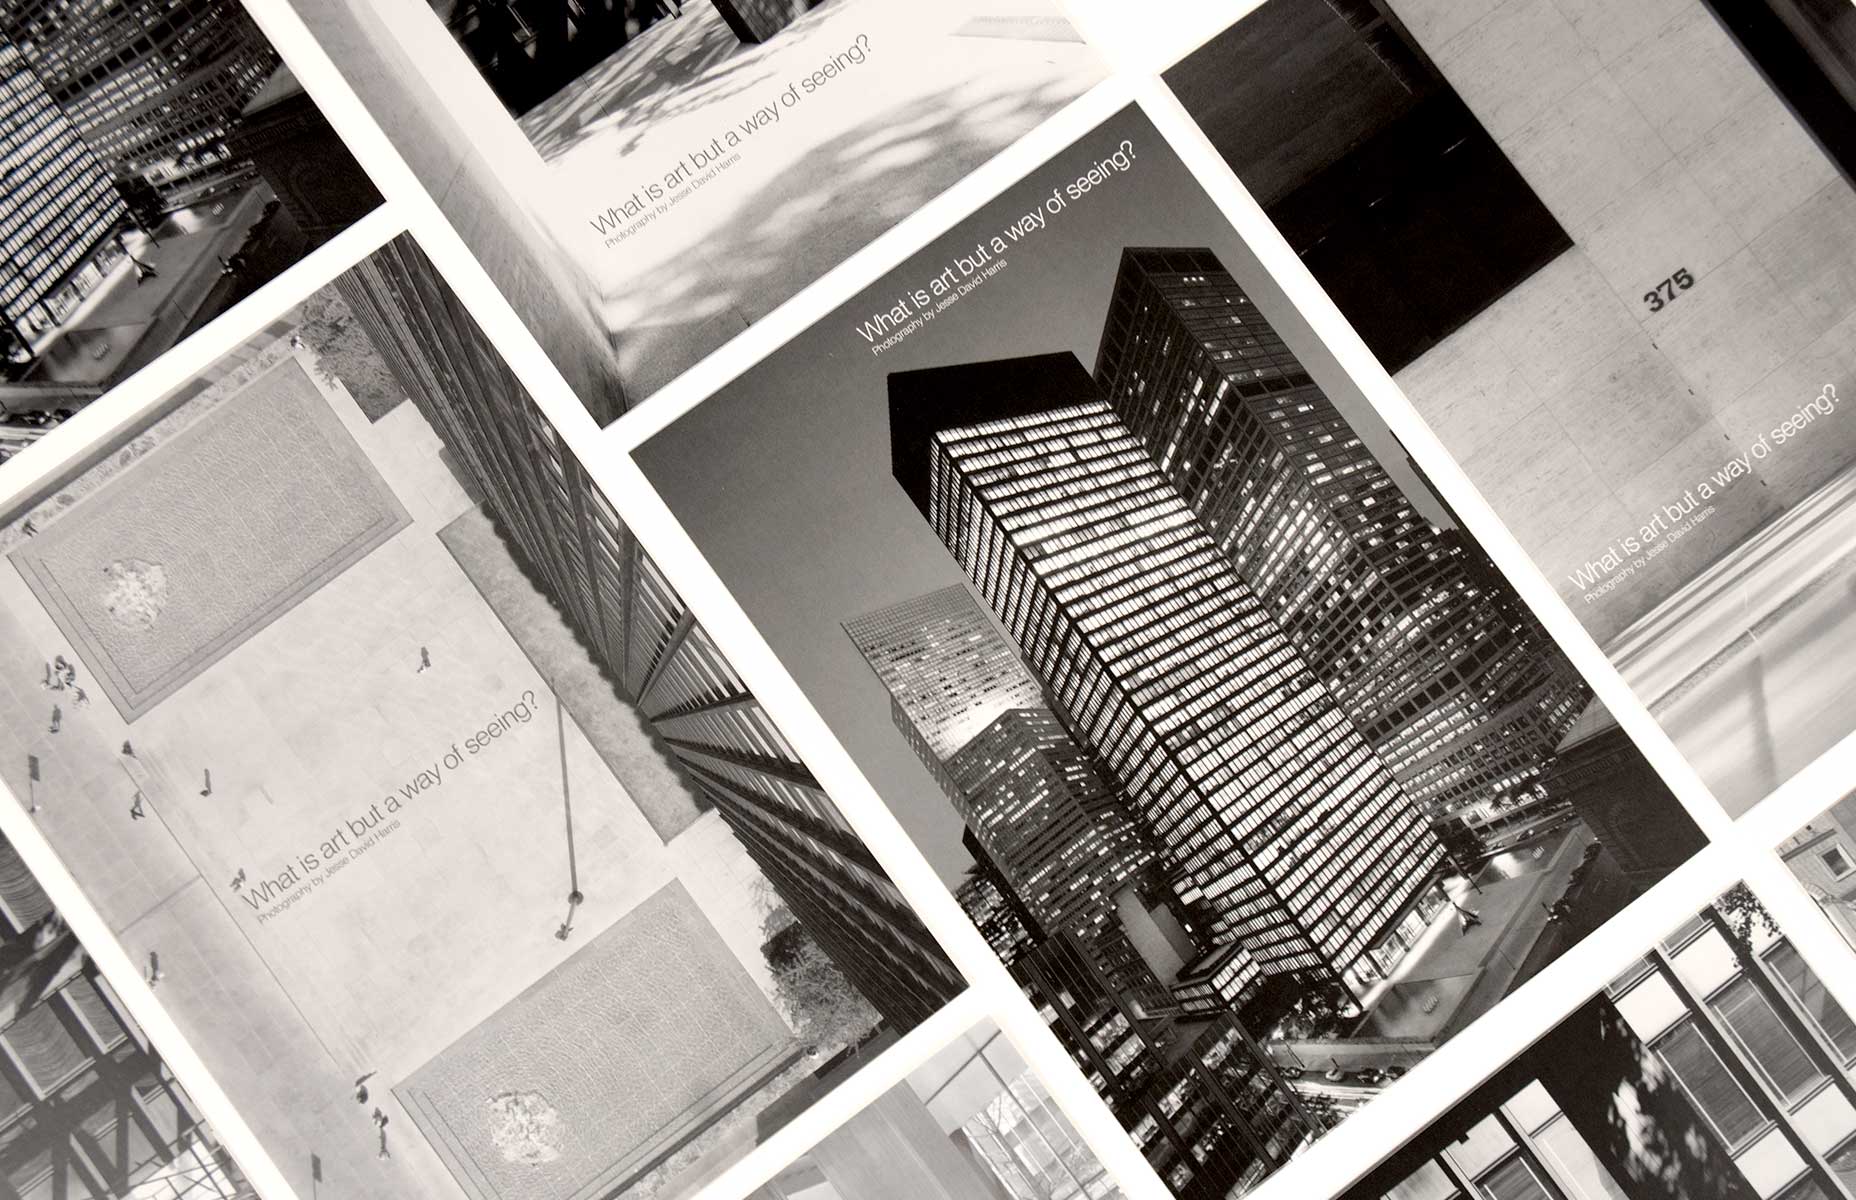 Print design for the Seagram Building.